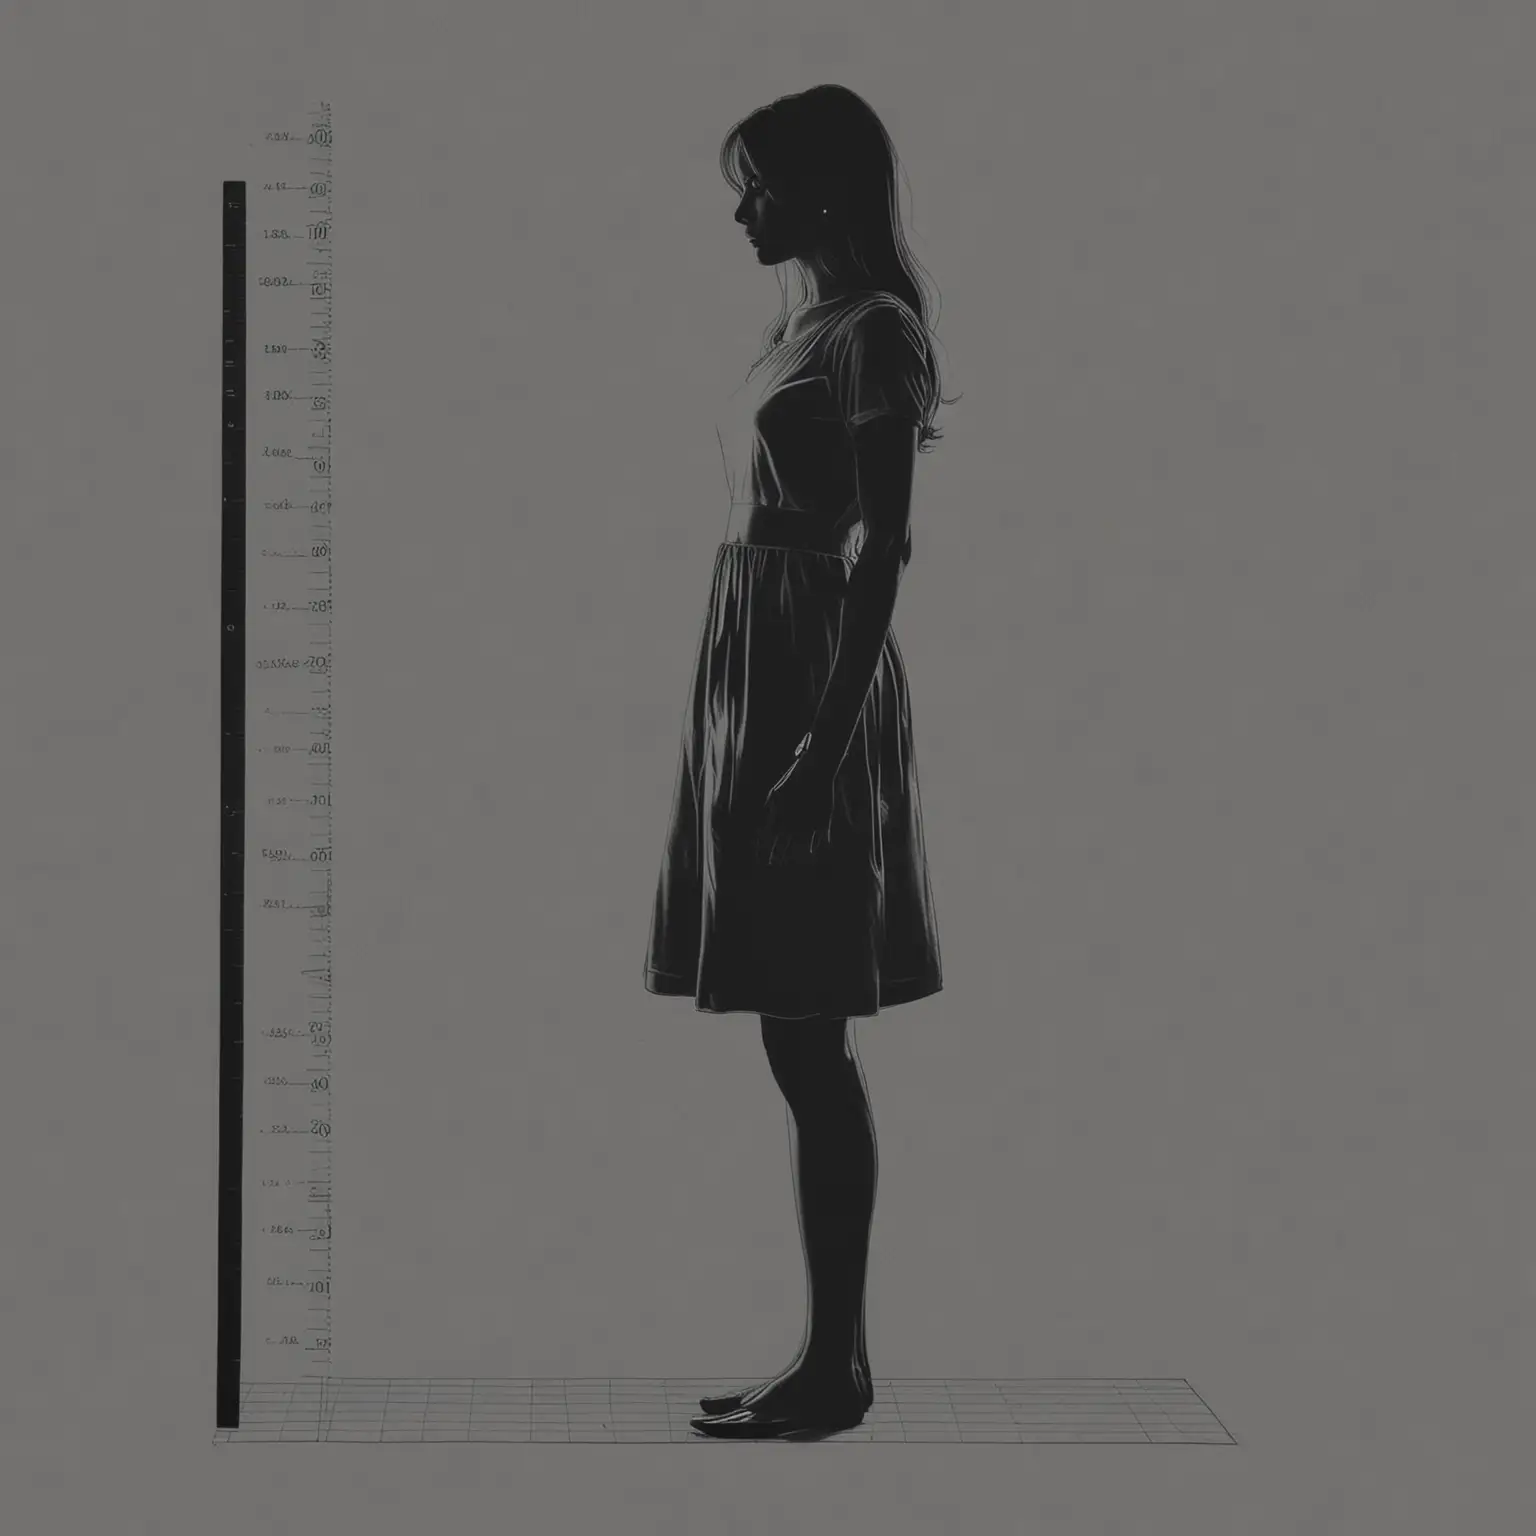 Silhouette of Female Side Profile in Dress with Ruler